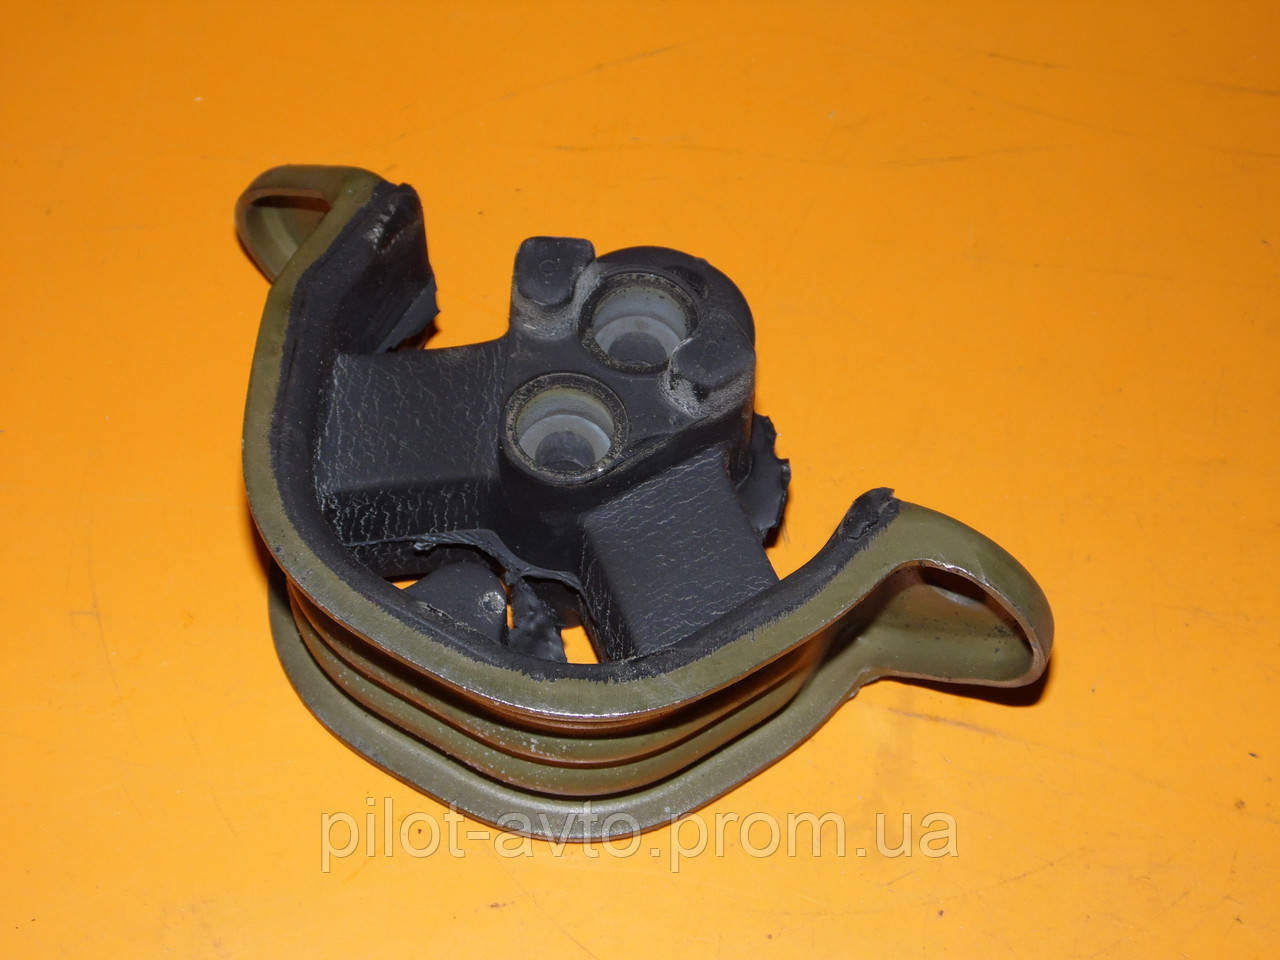 Опора двигуна LM 14680 01 Opel astra F vectra A